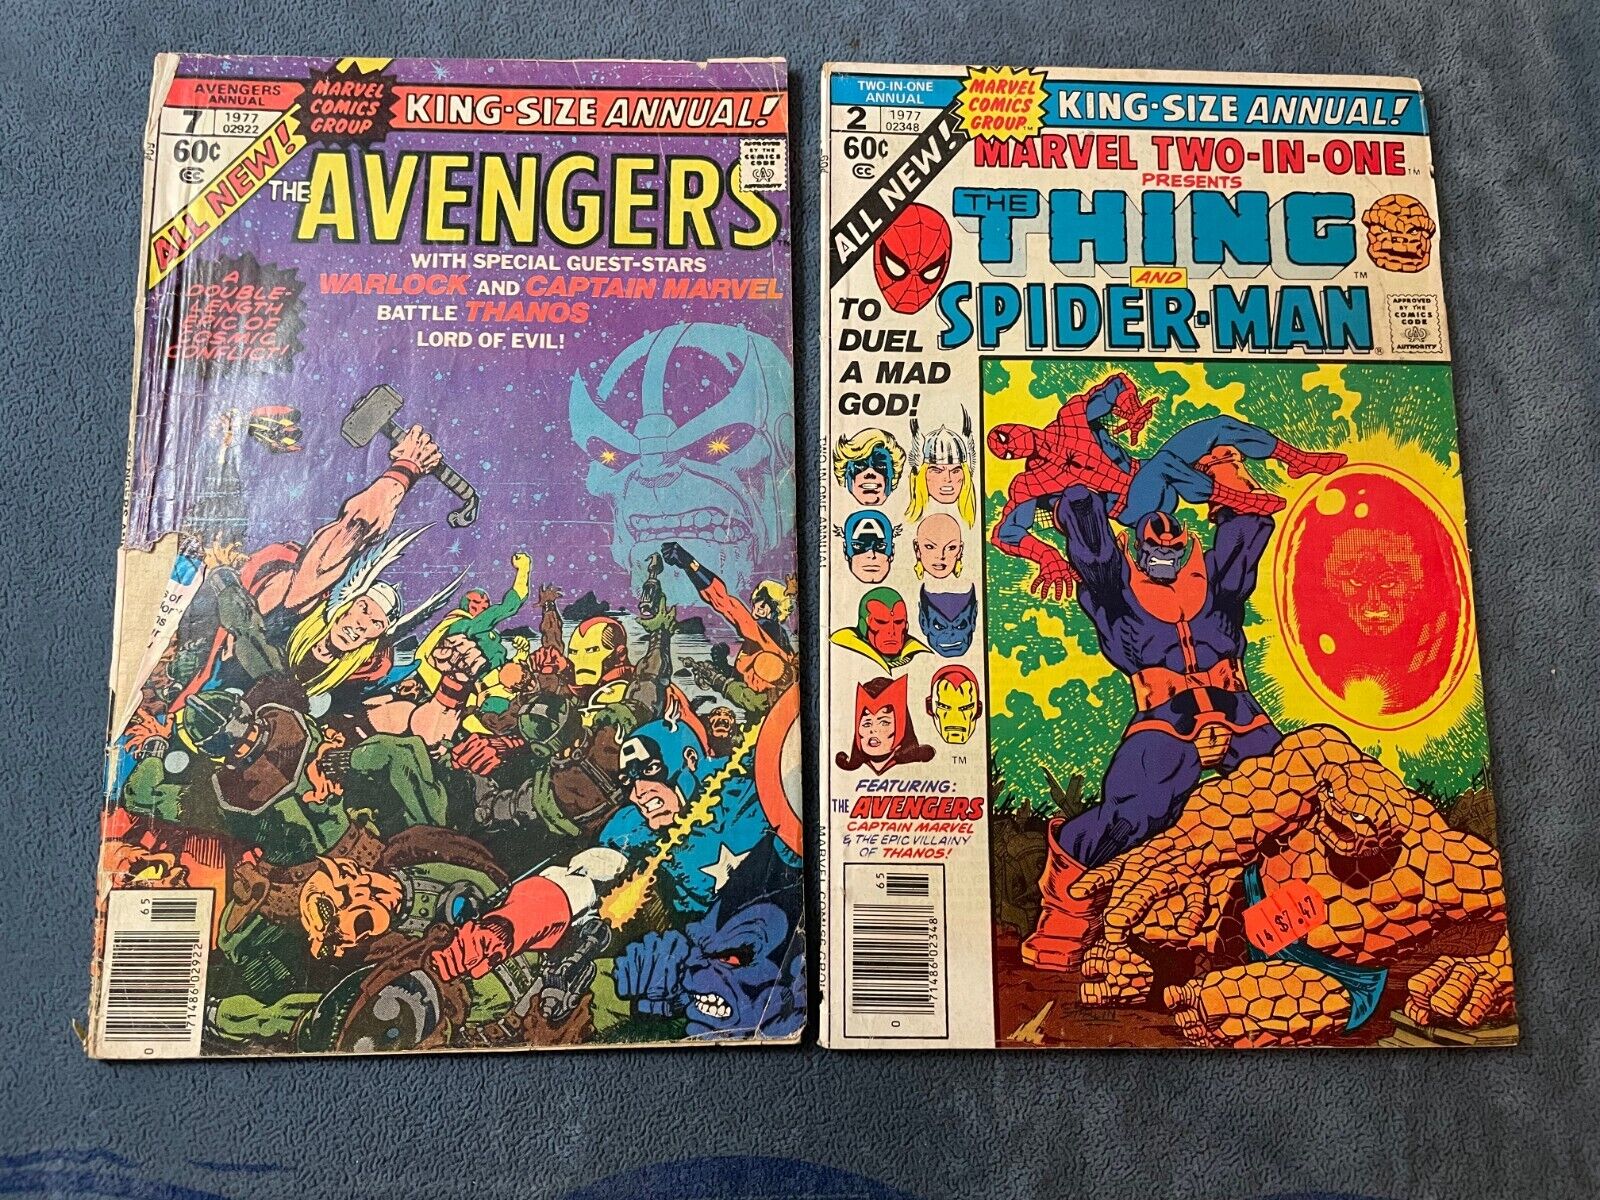 Avengers Annual #7 Marvel Two In One Annual #2 King Size Key Thanos Low Grade